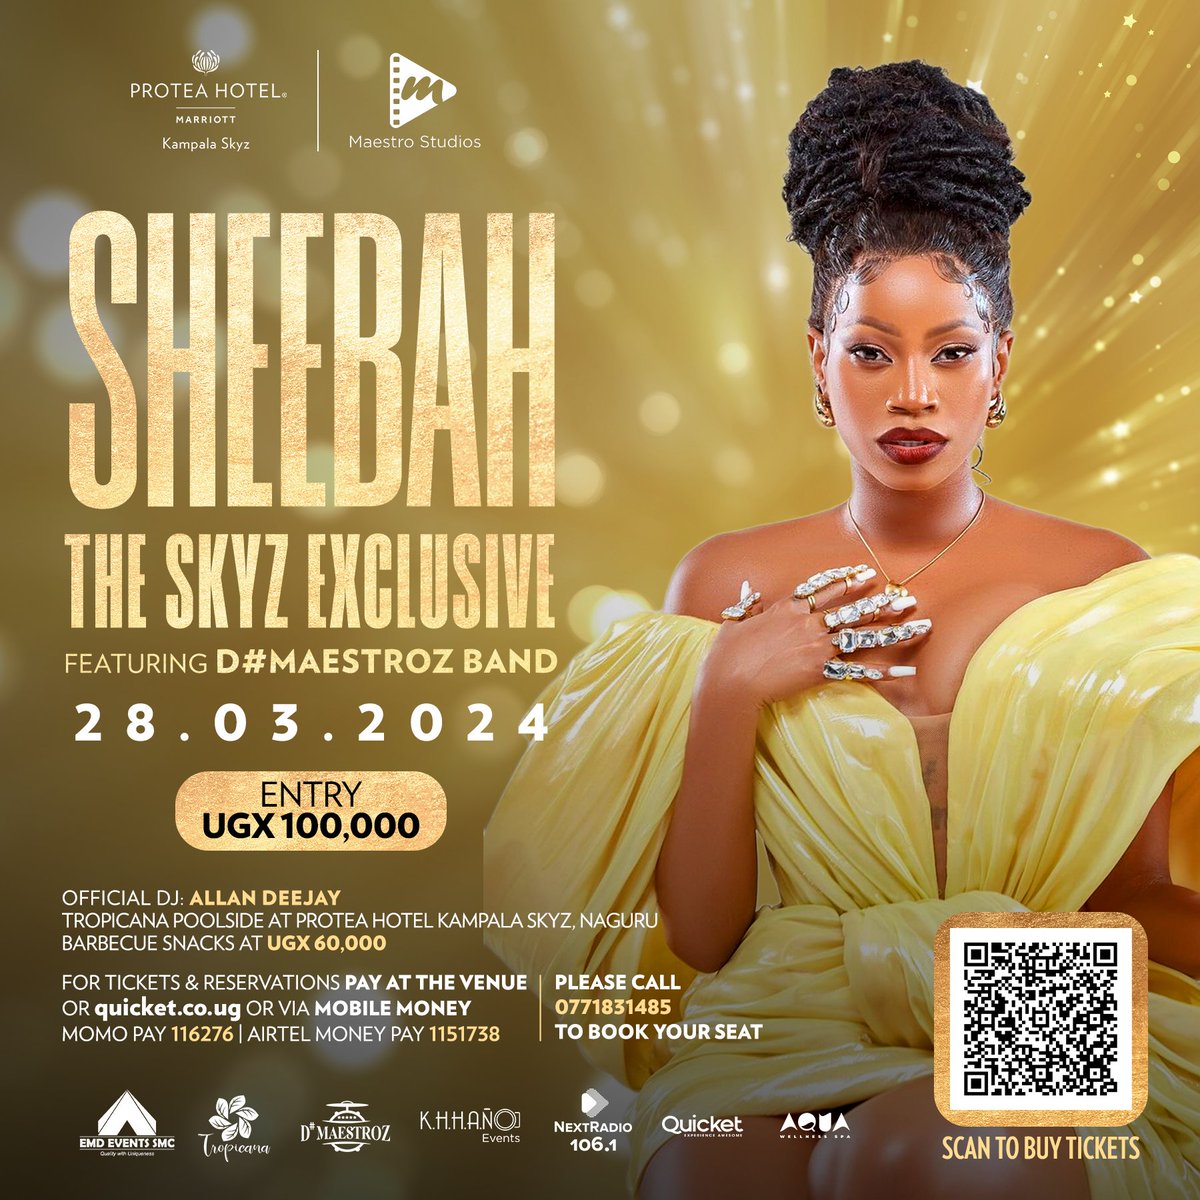 Today is a big day for the Sheebaholics! 💯🎶 Expect @Ksheebah1 to bring on that electric ⚡ performance on stage in an Exclusive performance featuring DMaestroz Band at @SkyzHotel Pool Side. You can still get tickets 🎟️ 🎫 or pay at the entrance. #TheSkyzExclusive